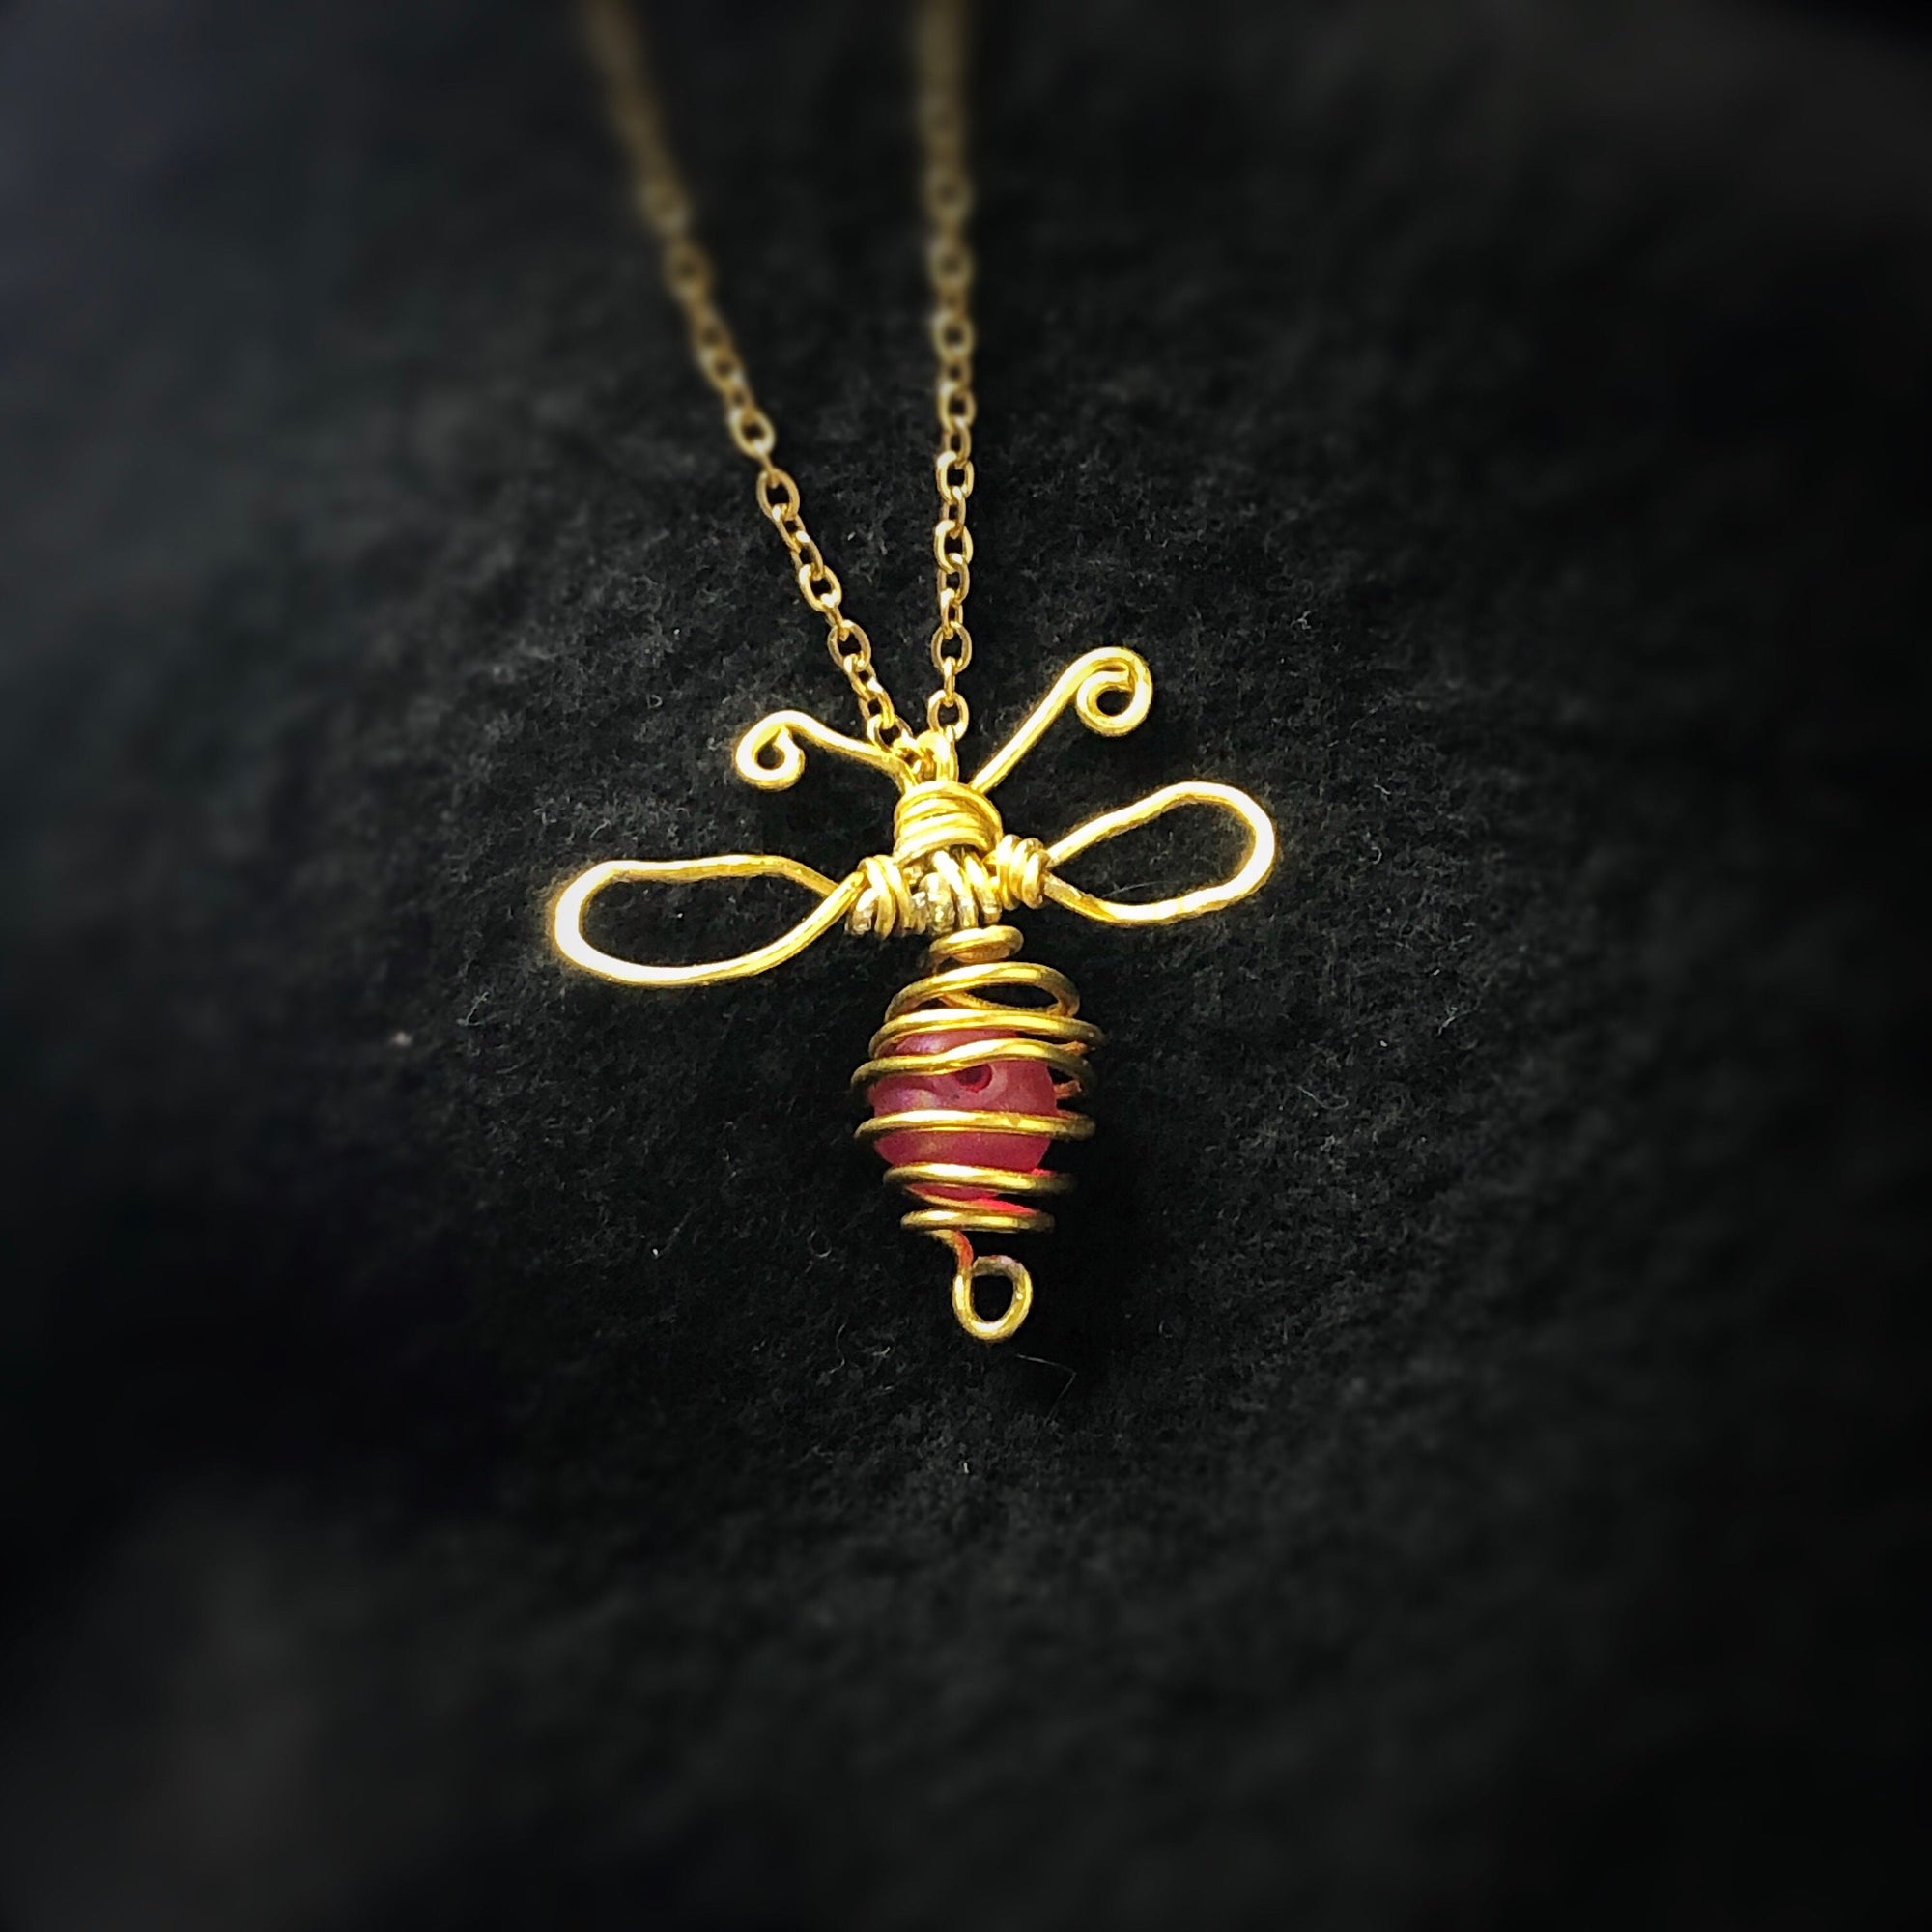 Personalized Cottagecore gold bee necklace pendant • Cottage core nature insect jewelry • Wire wrapped queen bee pendant bee keeping gift